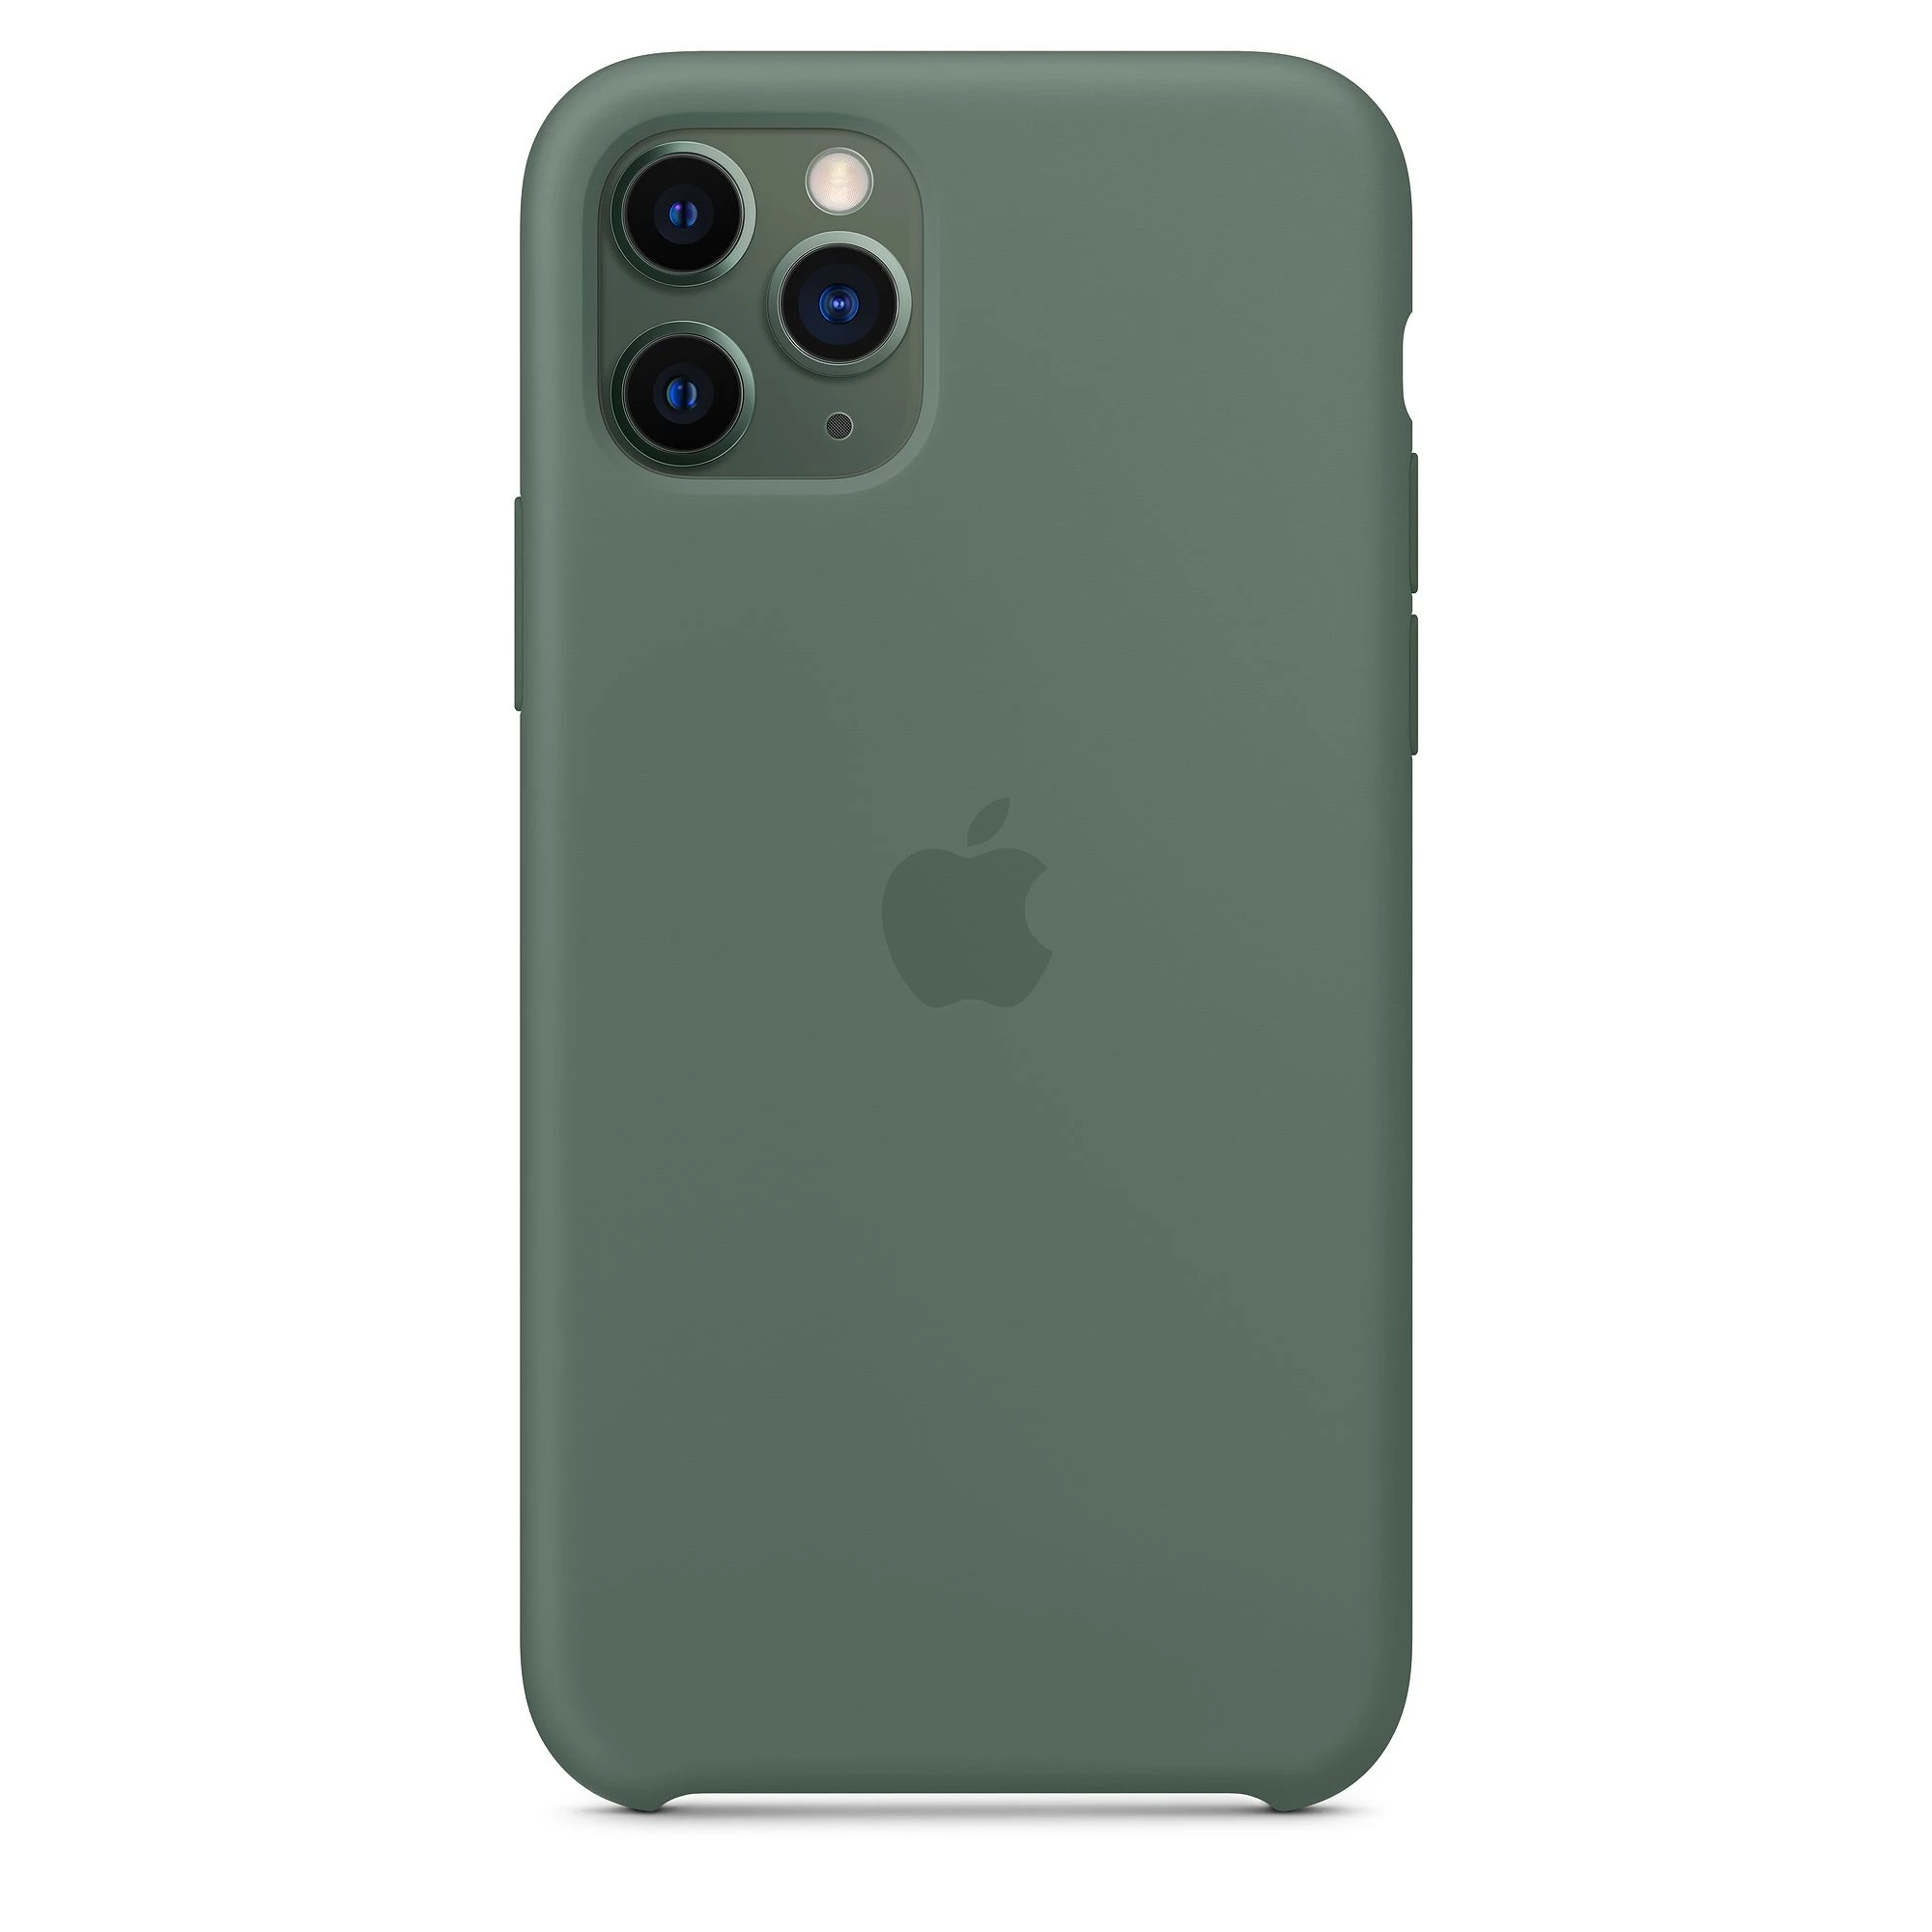 Apple iPhone 11 Pro Silicone Case - Pine Green (MWYP2)